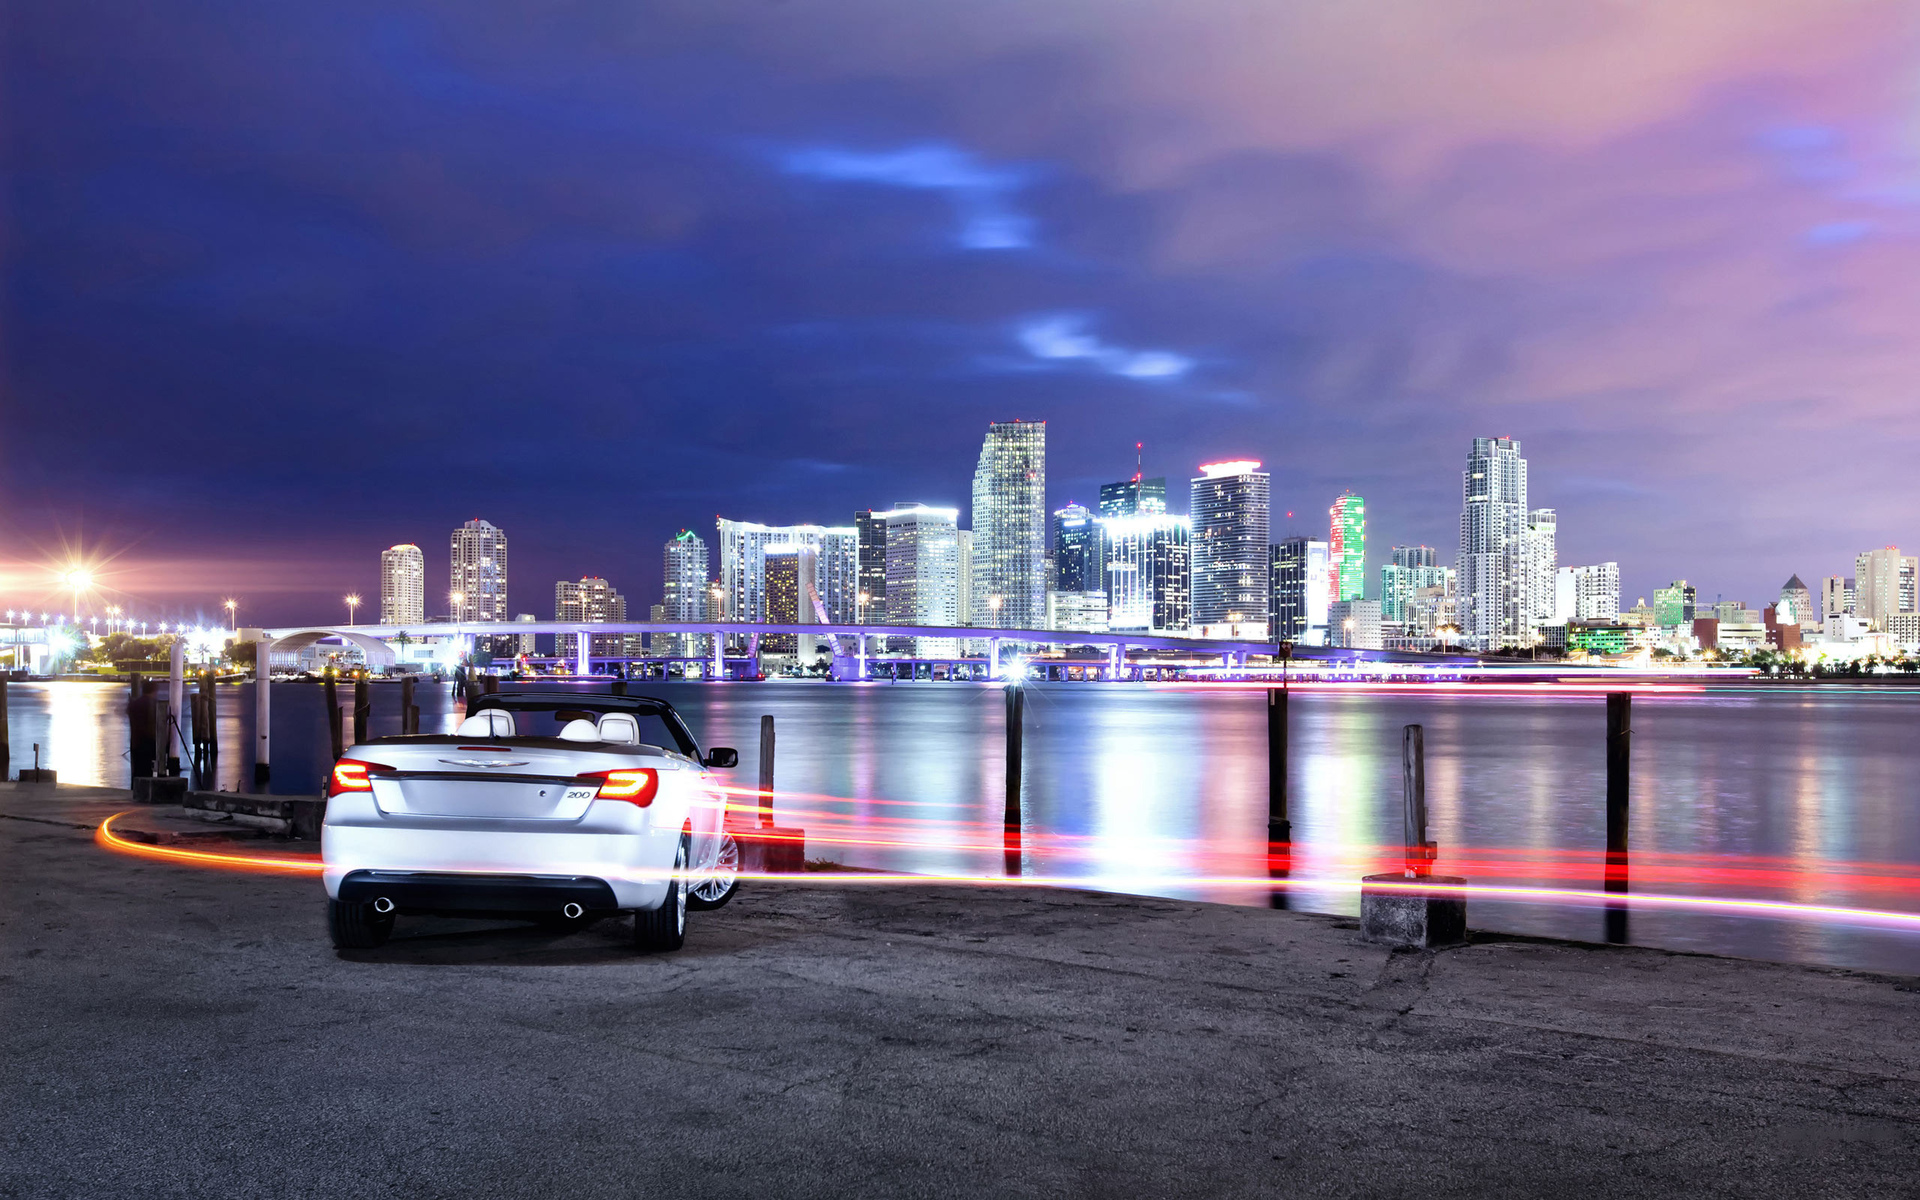 vehicles, Cars, Auto, Chrysler, 200, Timelapse, Lapse, Lights, Streak, Motion, Roads, Water, Harbor, World, Bay, Ocean, Sea, Lakes, Cities, Architecture, Buildings, Skyscrapers, Night, Sky, Clouds, Scenic, Bright Wallpaper